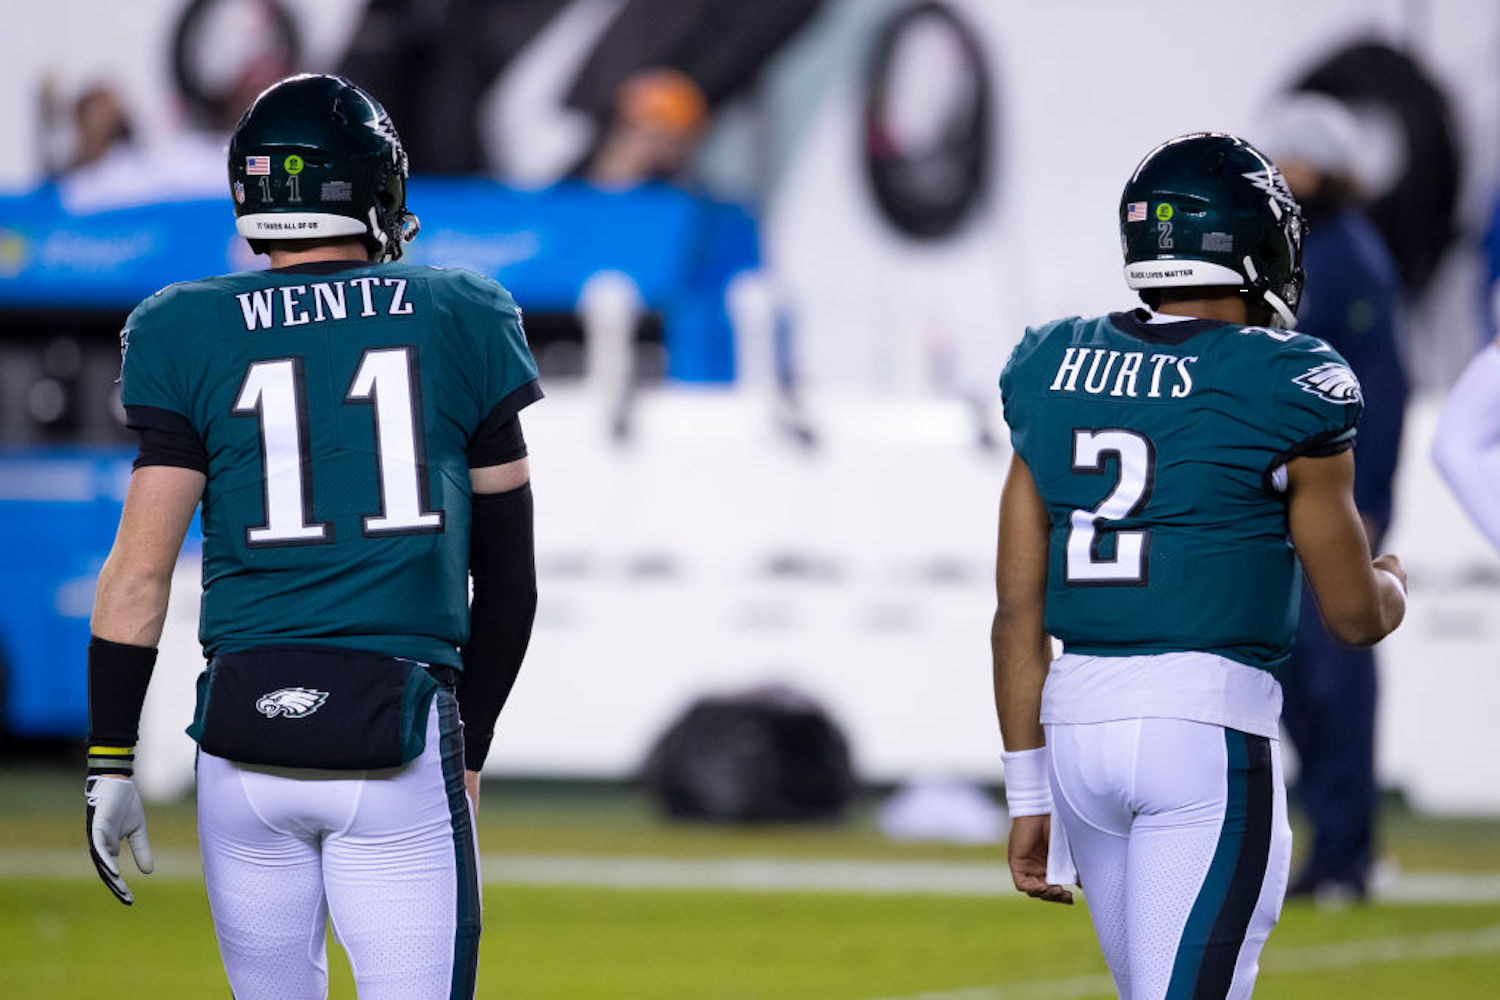 Philadelphia Eagles QB Carson Wentz has been benched for rookie Jalen Hurts, but the former Pro Bowler is still in high spirits.